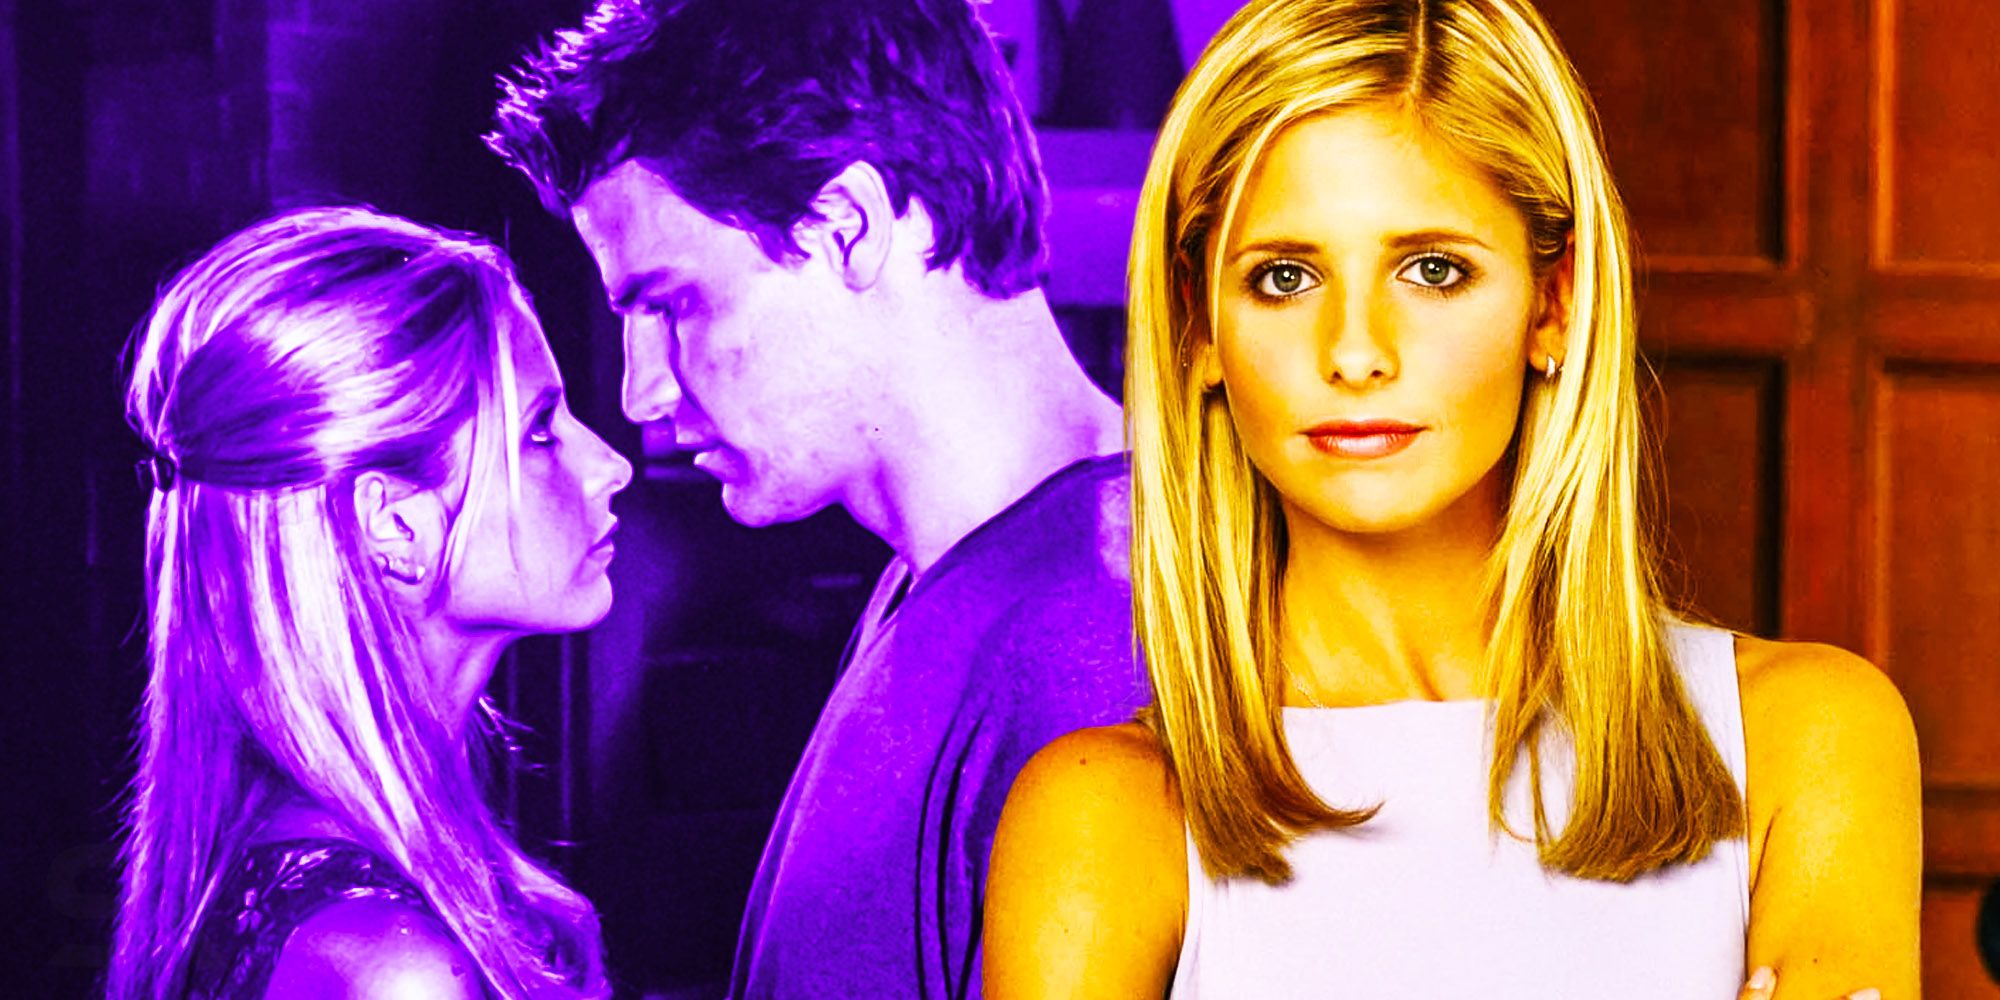 Split image of Buffy about to kiss Angel and Buffy standing looking at the camera